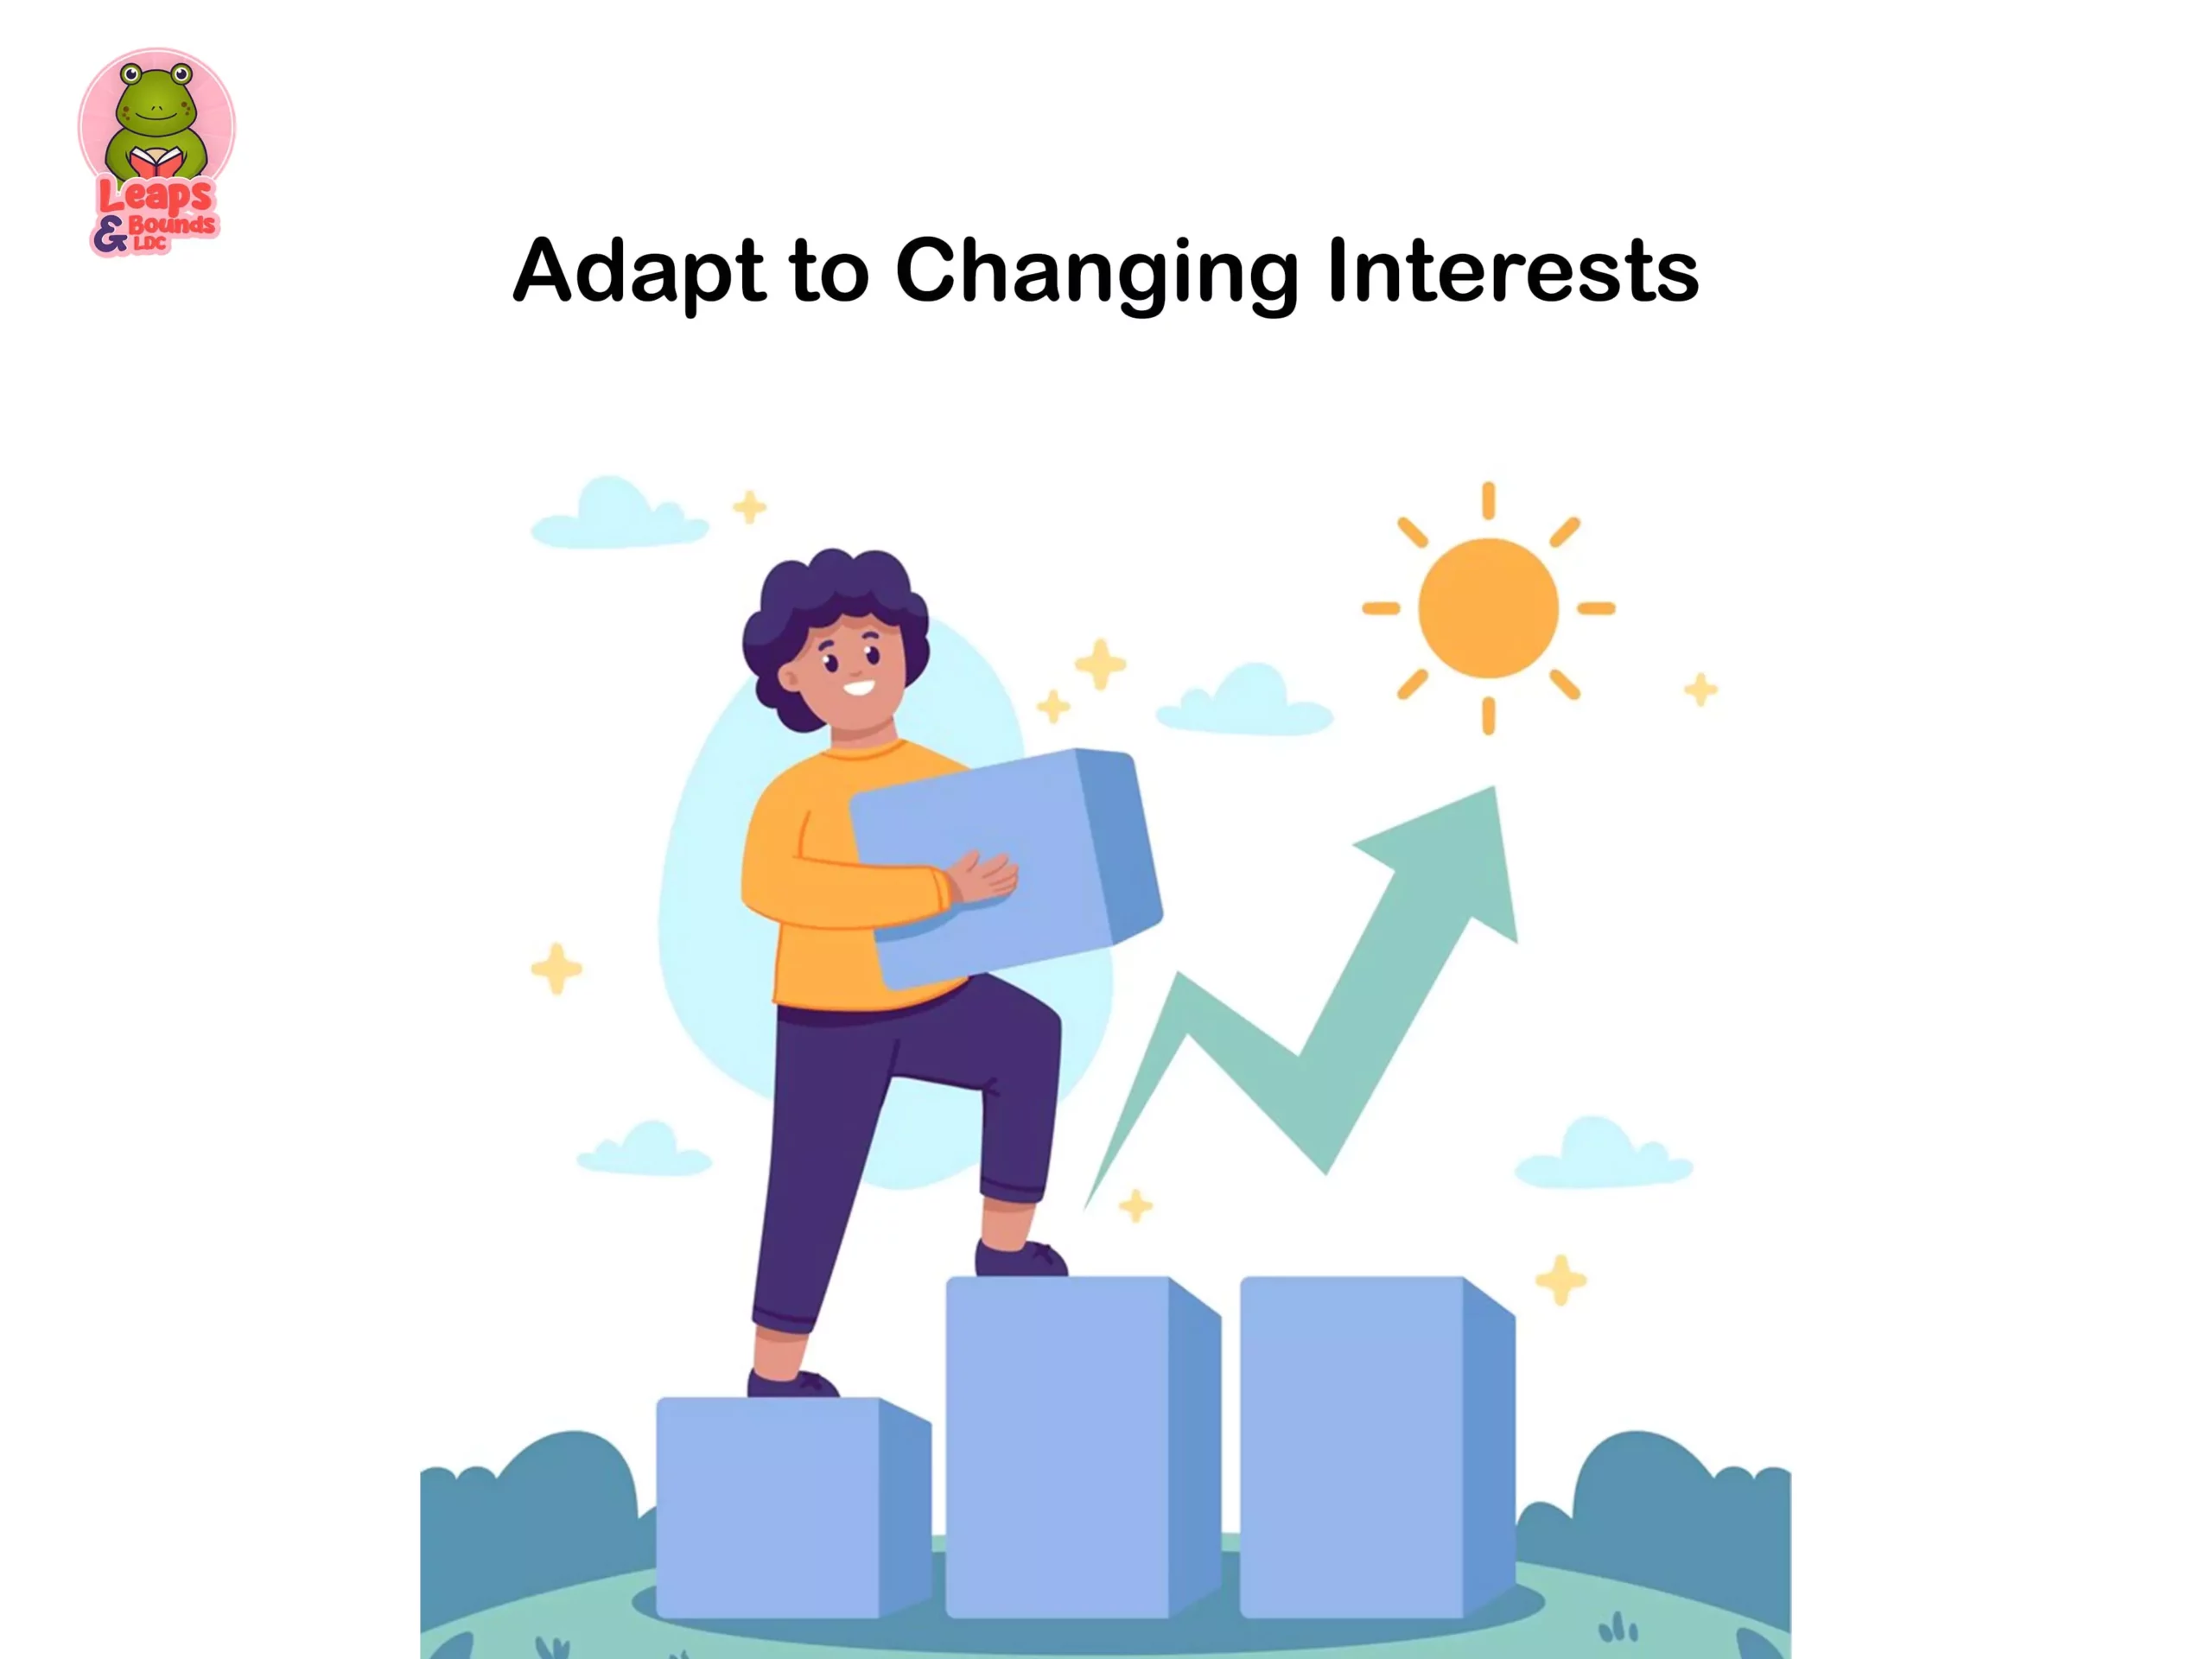 Adapt to Changing Interests